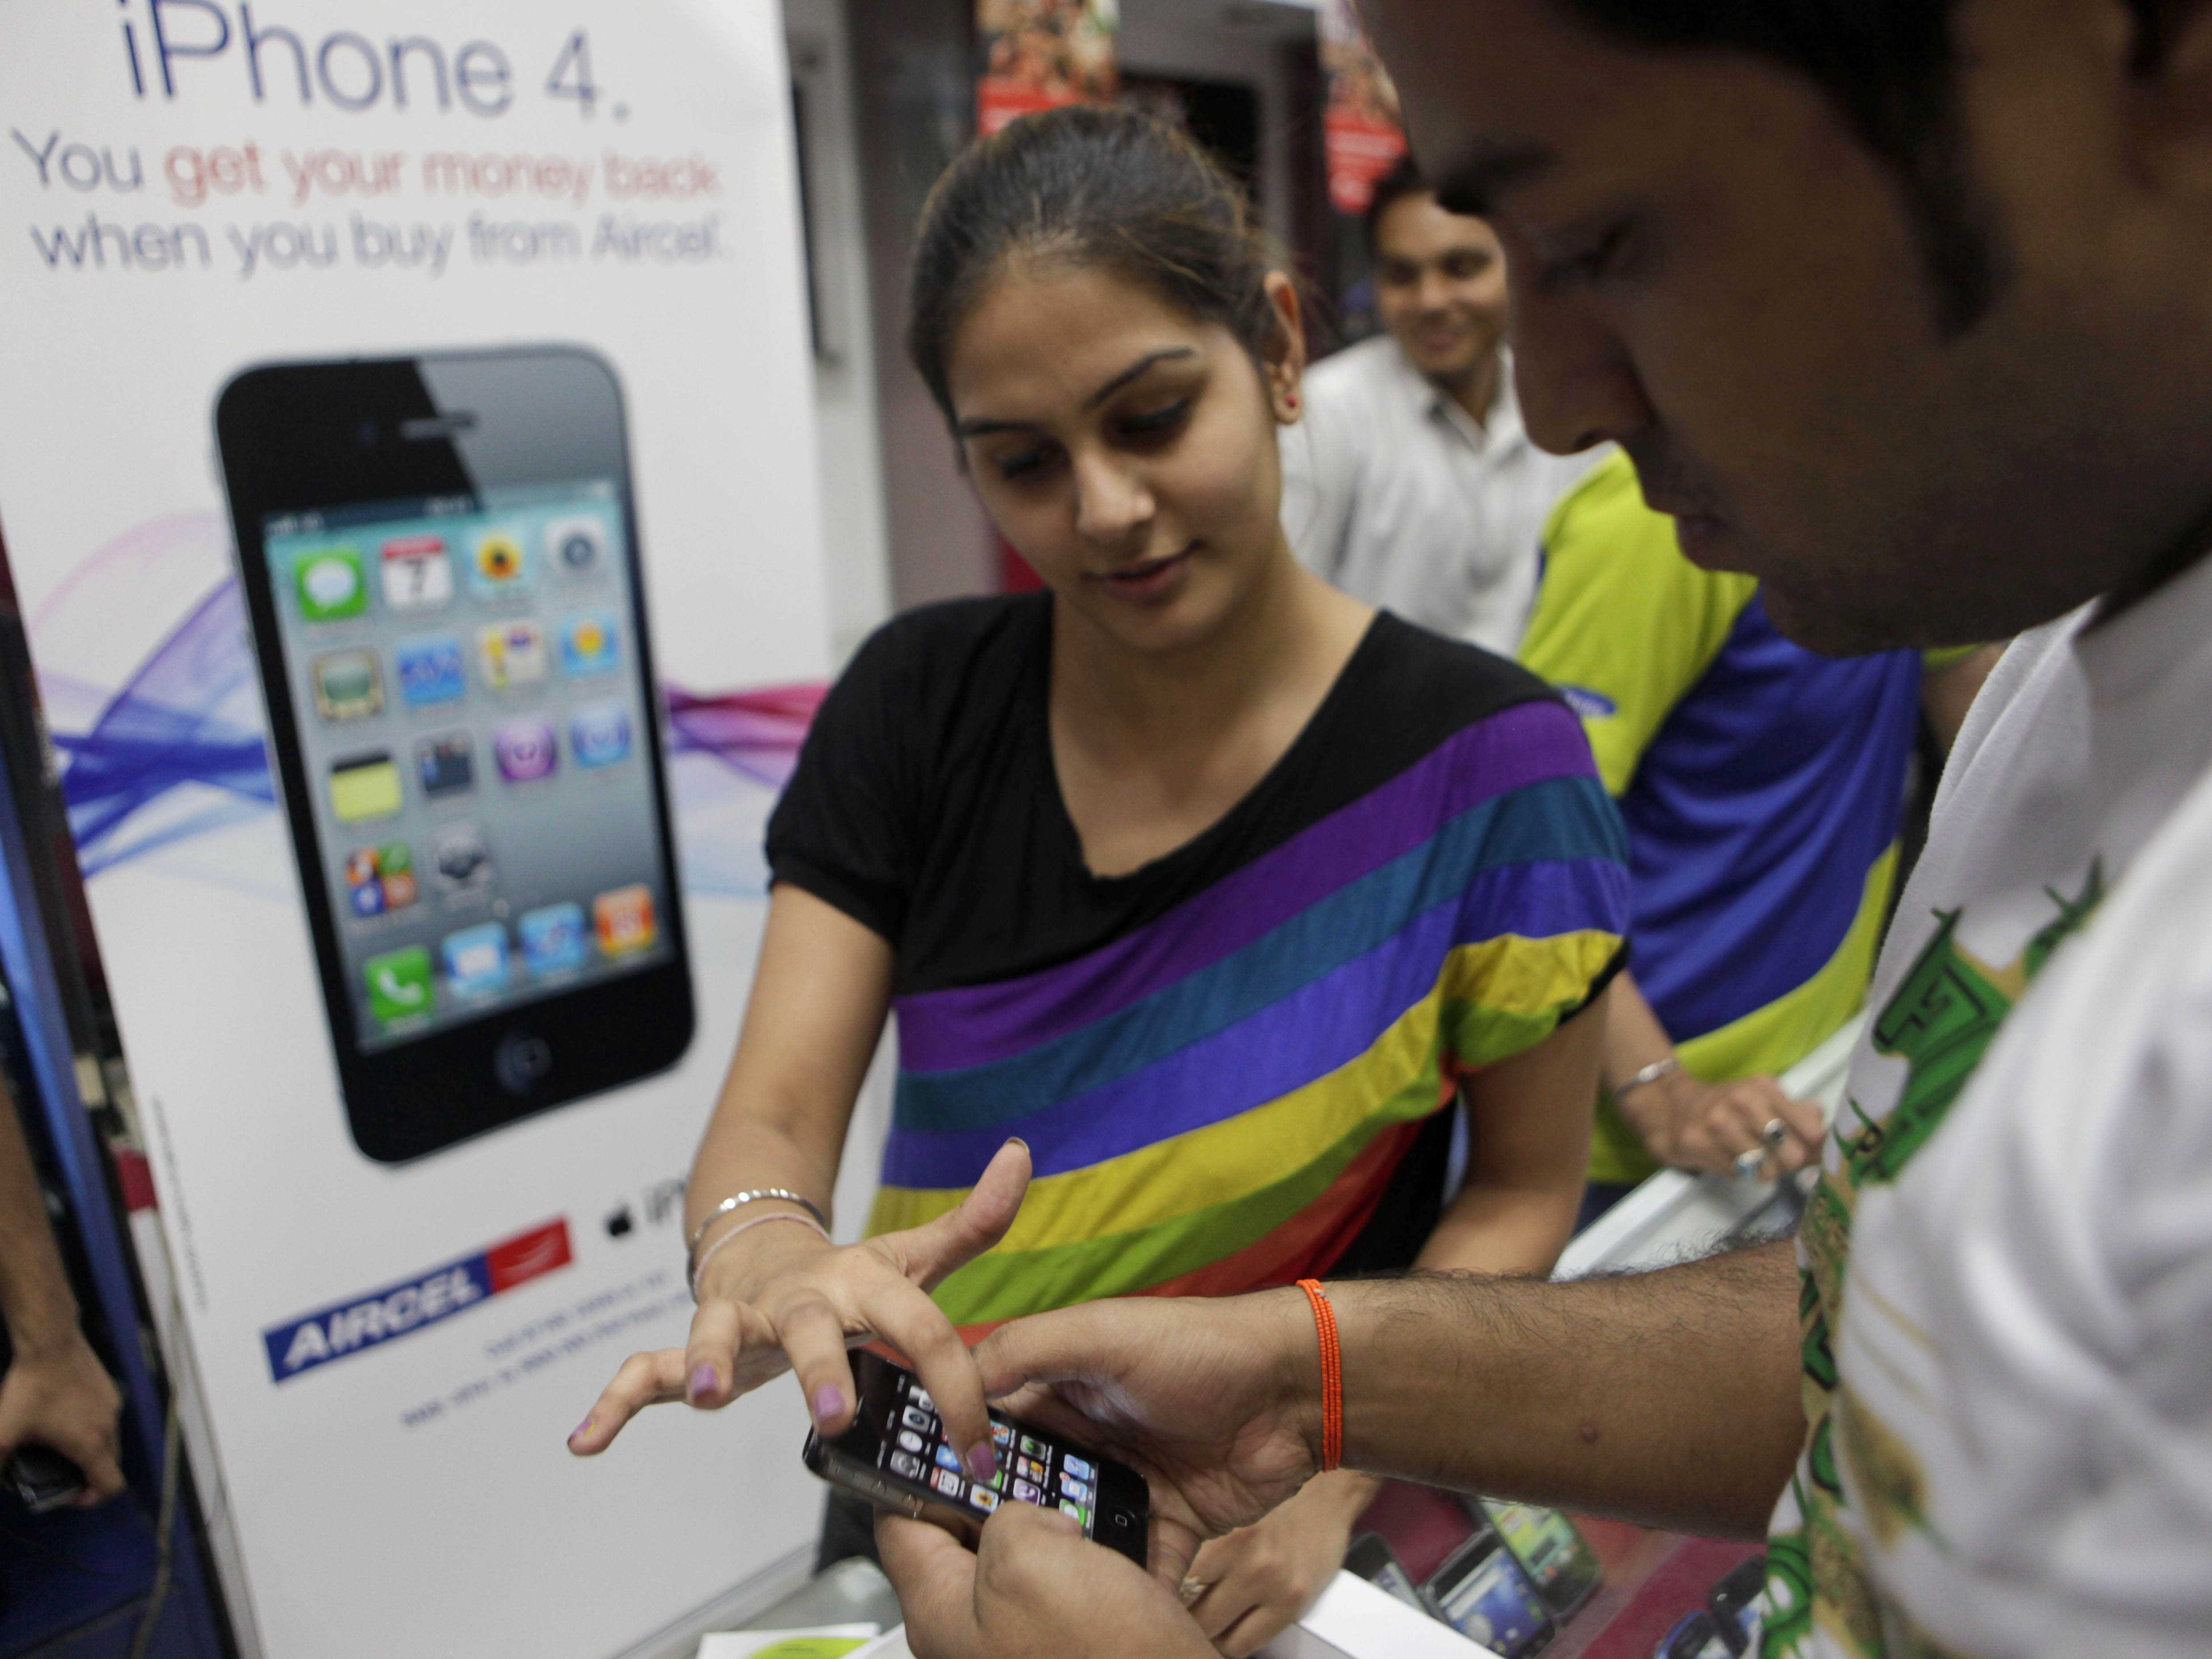 apple reportedly has a radical new plan for india its going to sell the iphone 4 at a low price